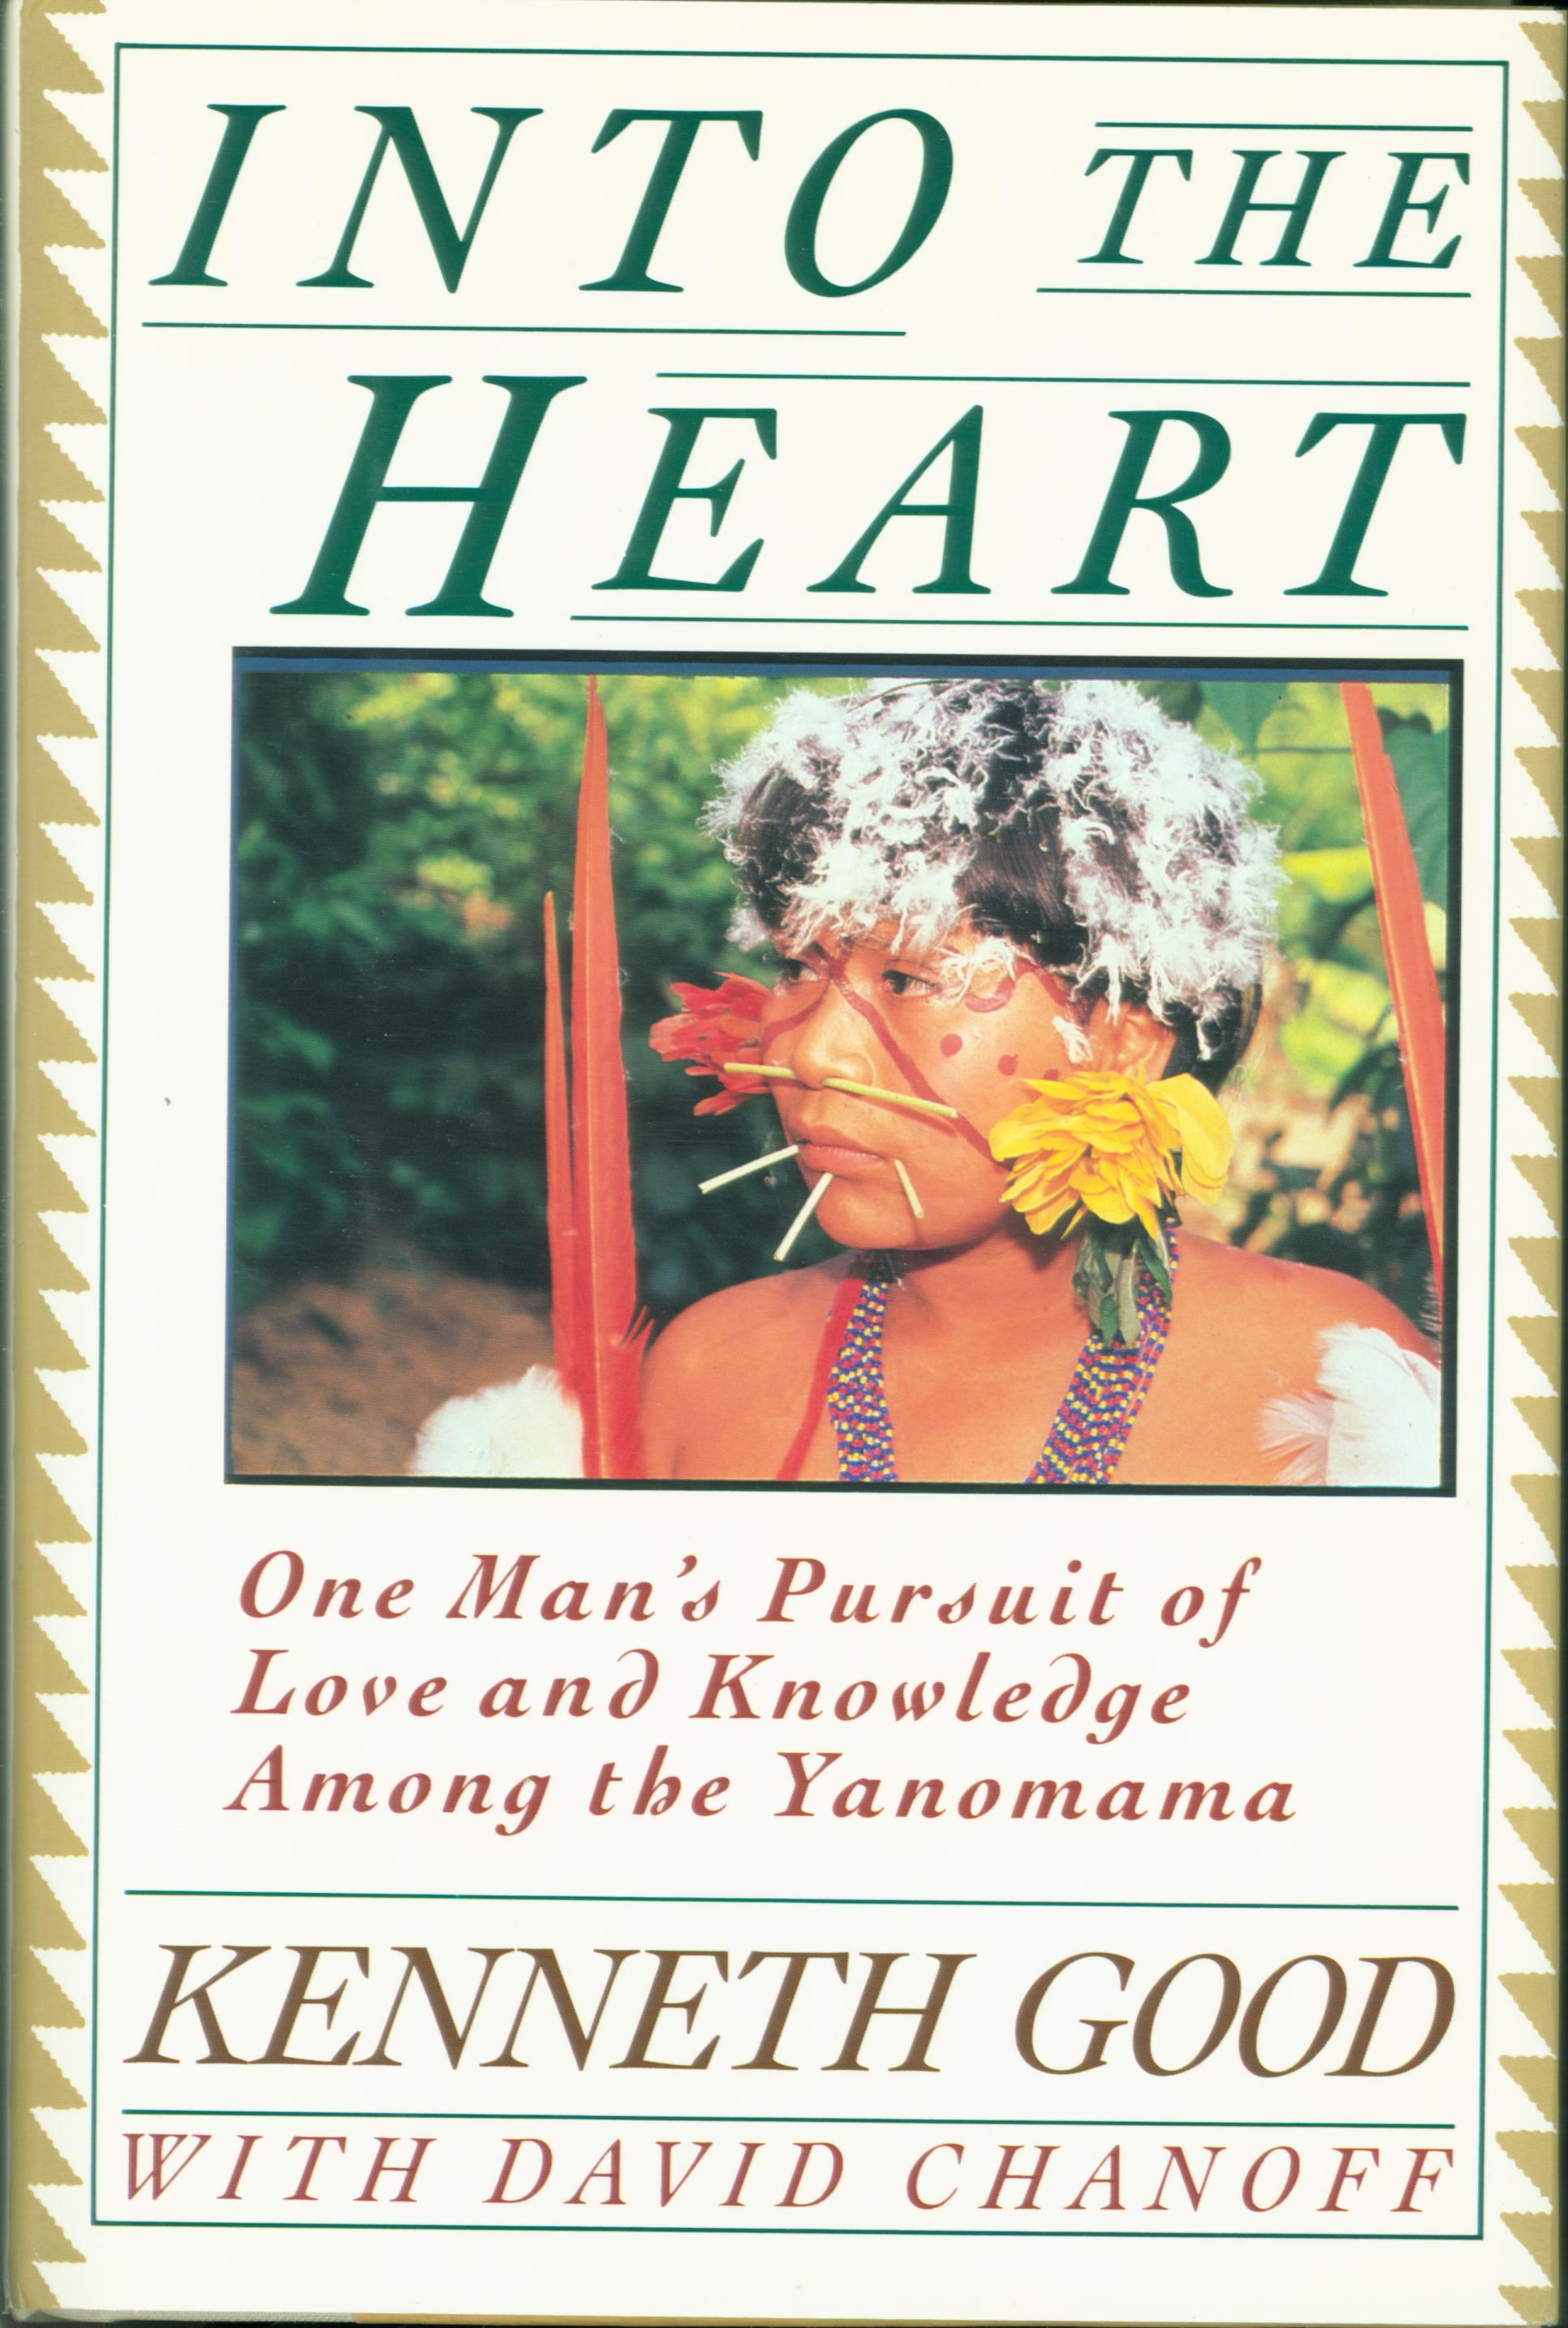 NTO THE HEART: one man's pursuit of love and knowledge among the Yanomana.